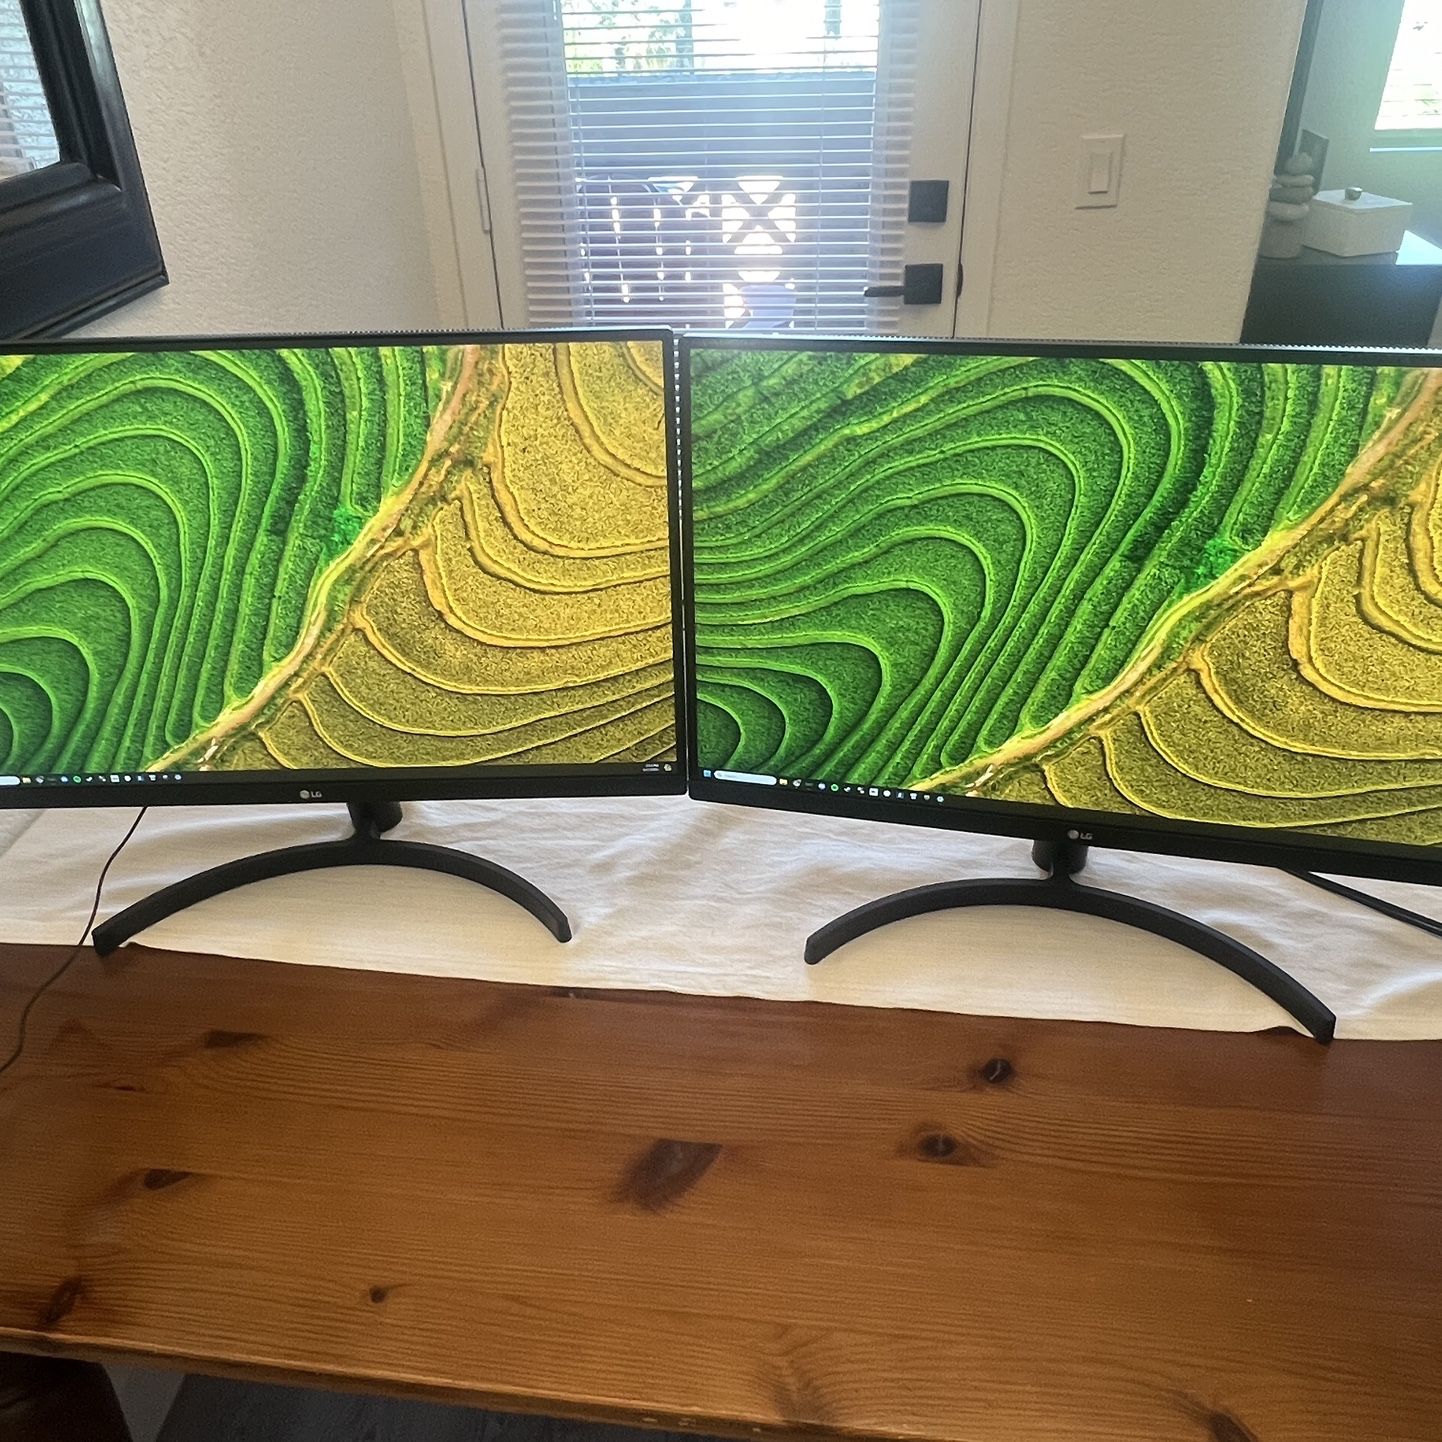 Pair of LG 27 Inch Height Adjustable Monitors - 1440p 75 Hz - 27QN600 - Add Mount for $20